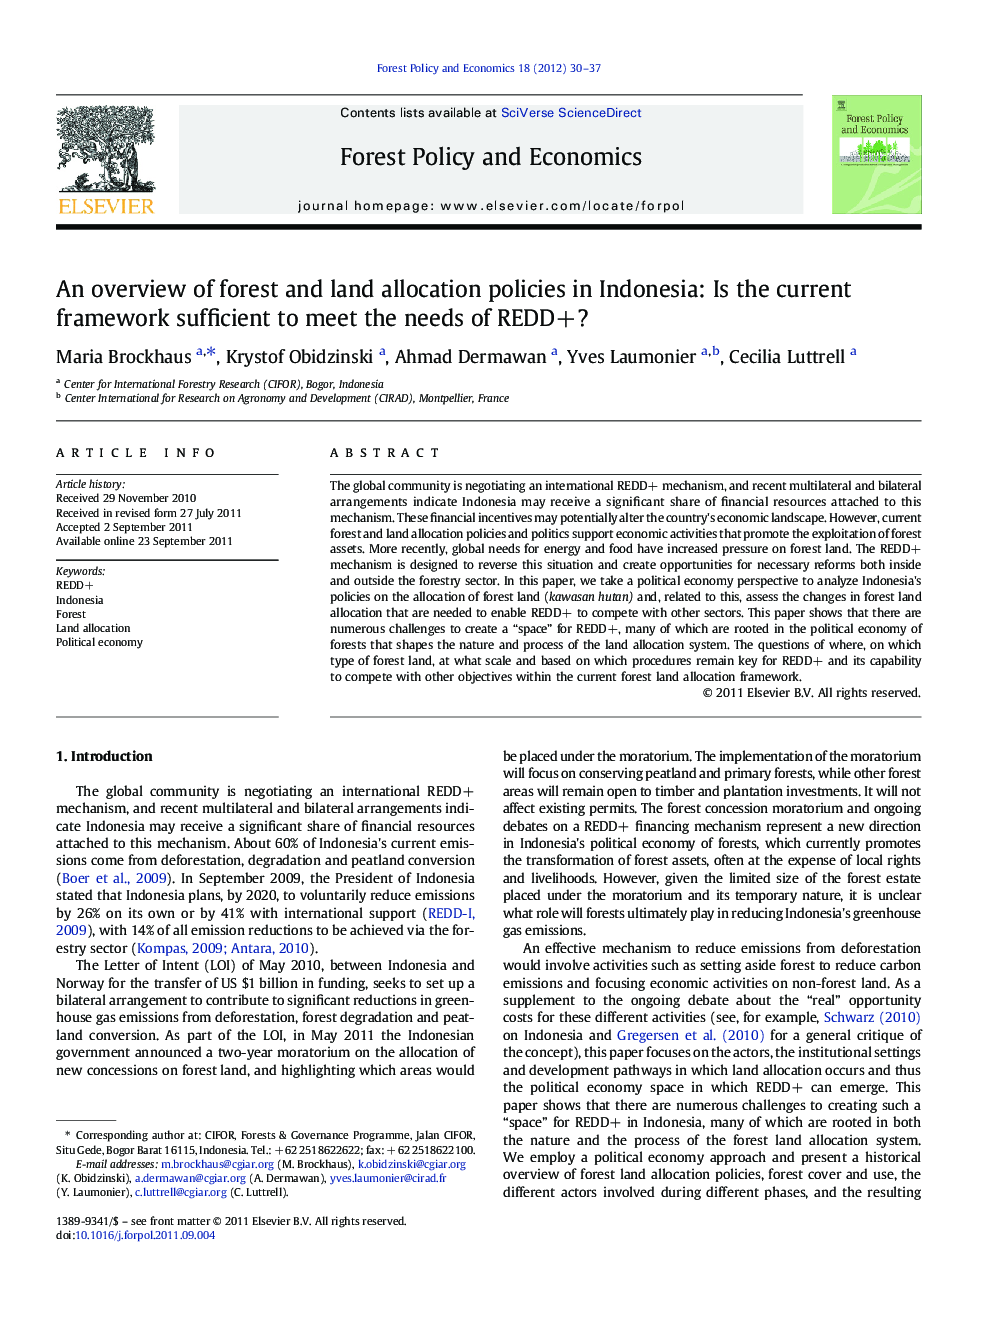 An overview of forest and land allocation policies in Indonesia: Is the current framework sufficient to meet the needs of REDD+?